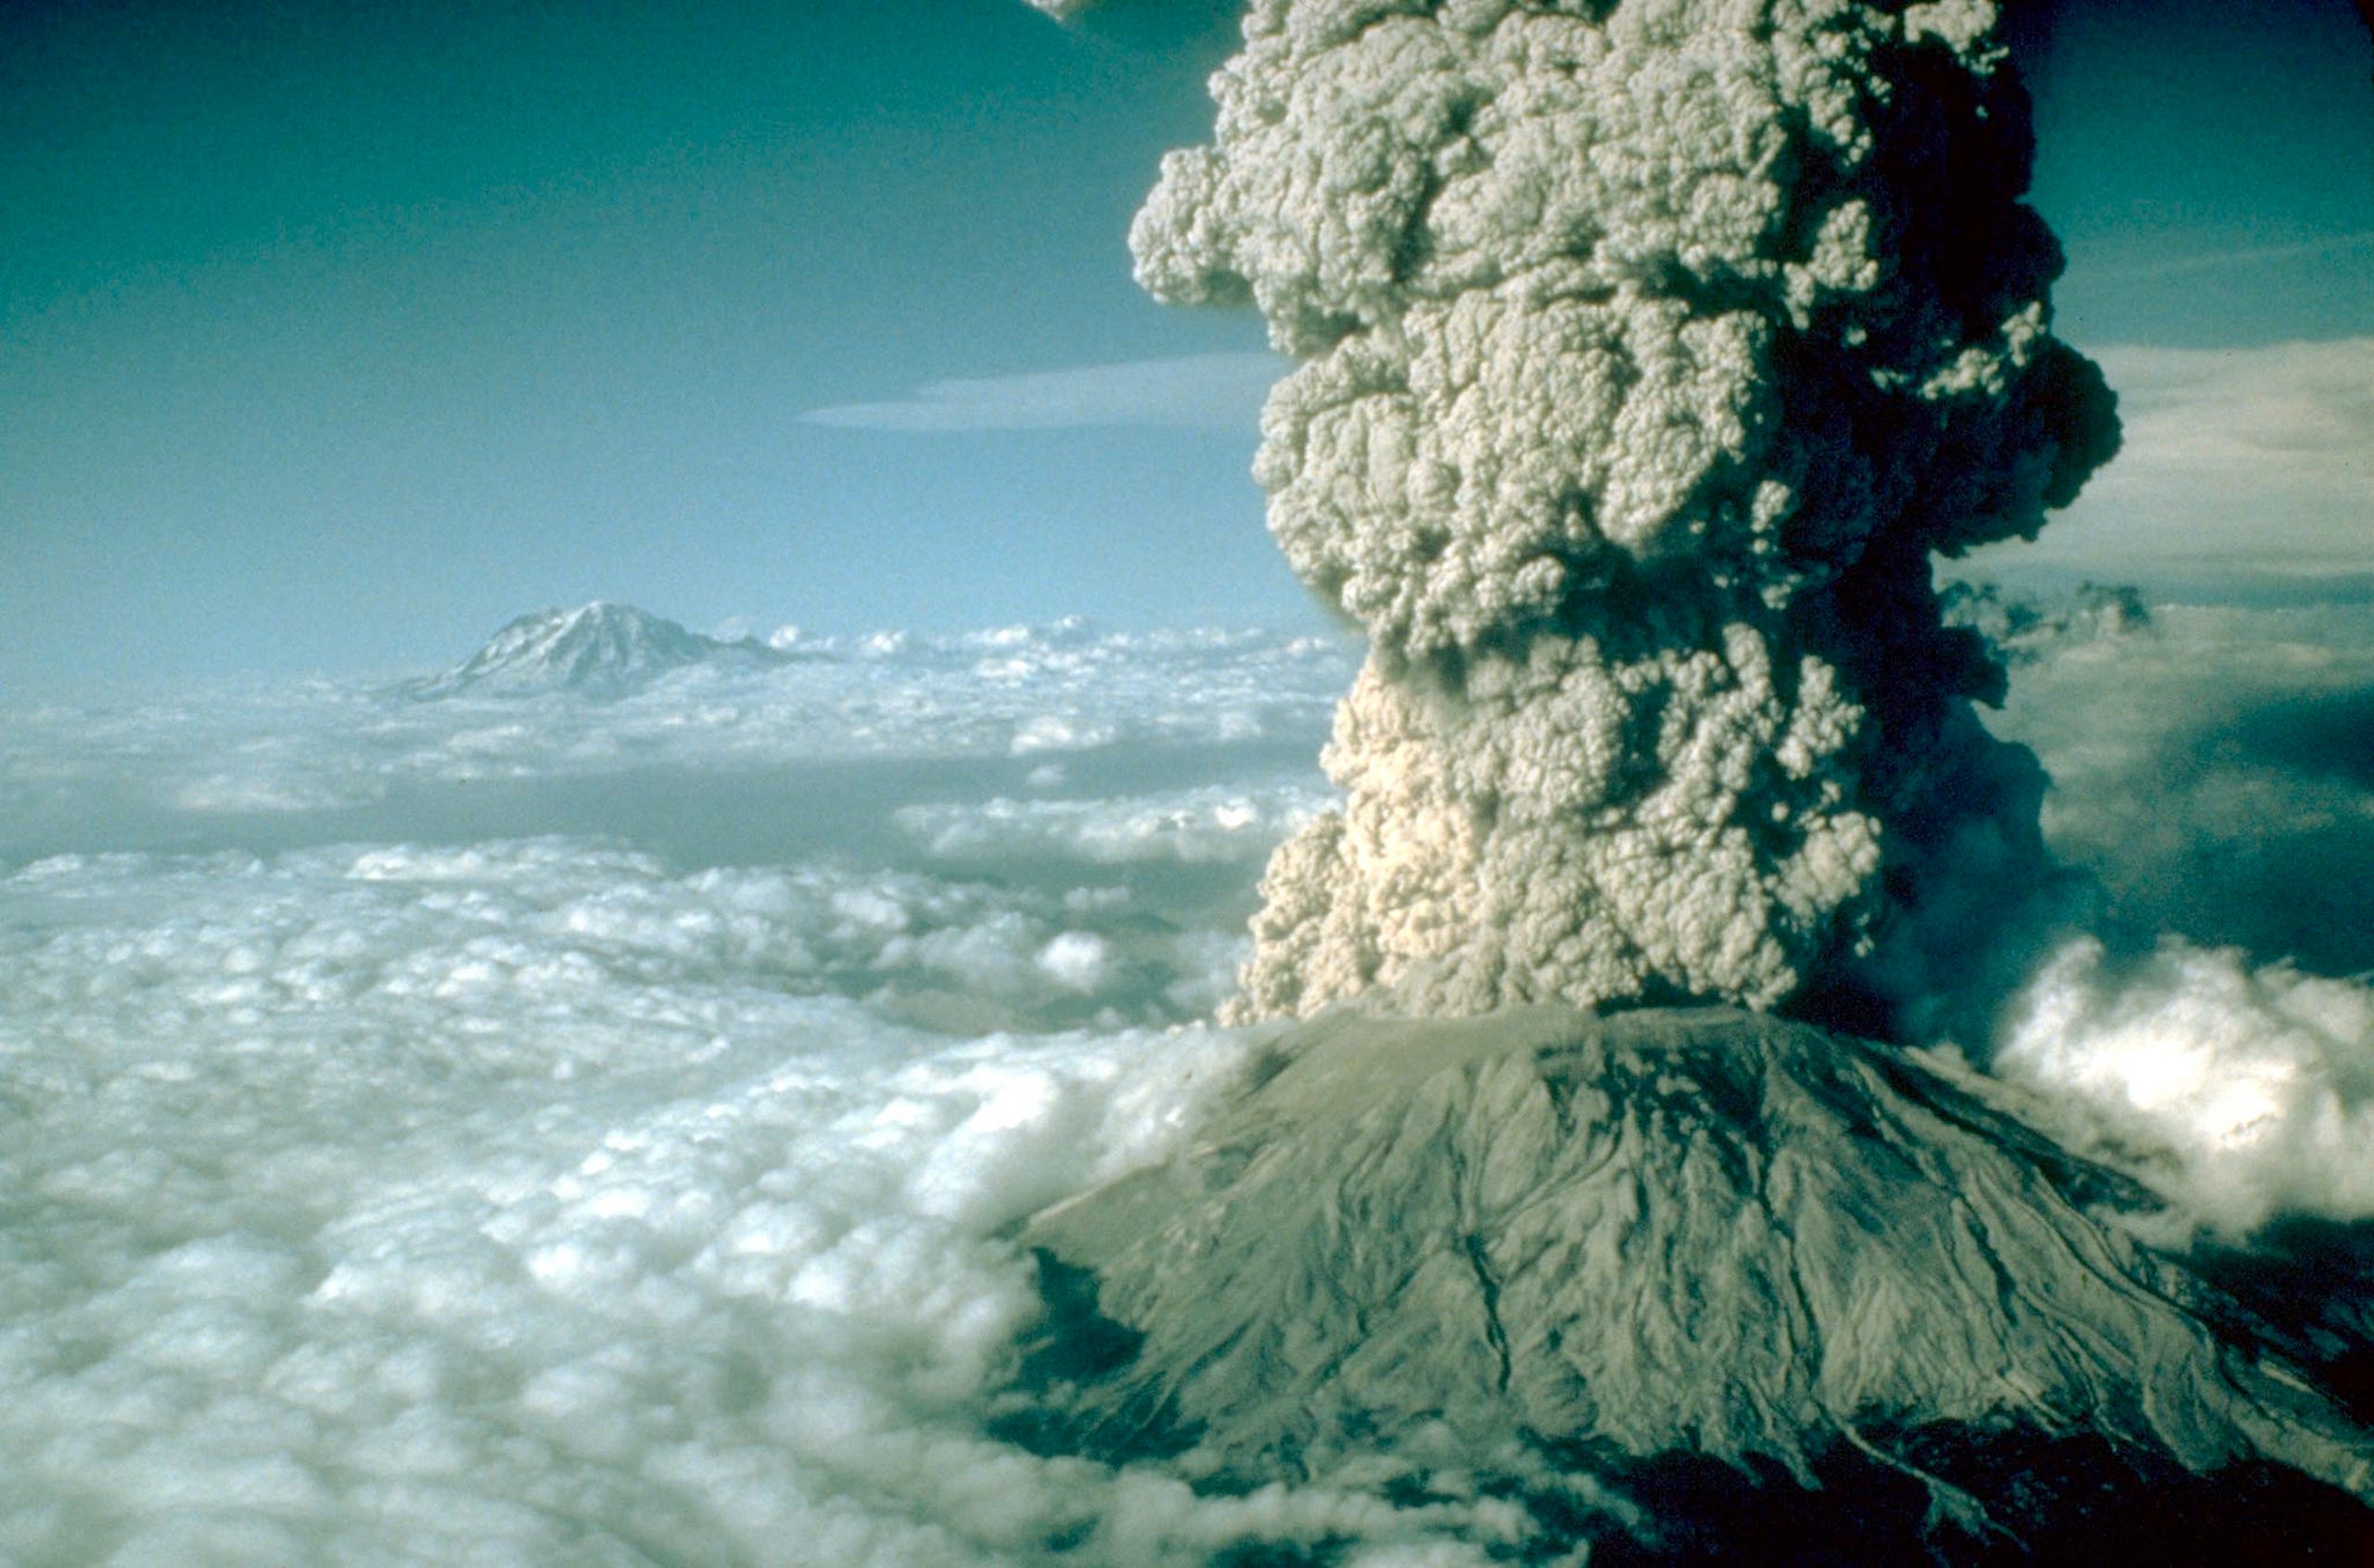 Pictures from the 1980 Mount St. Helens eruption